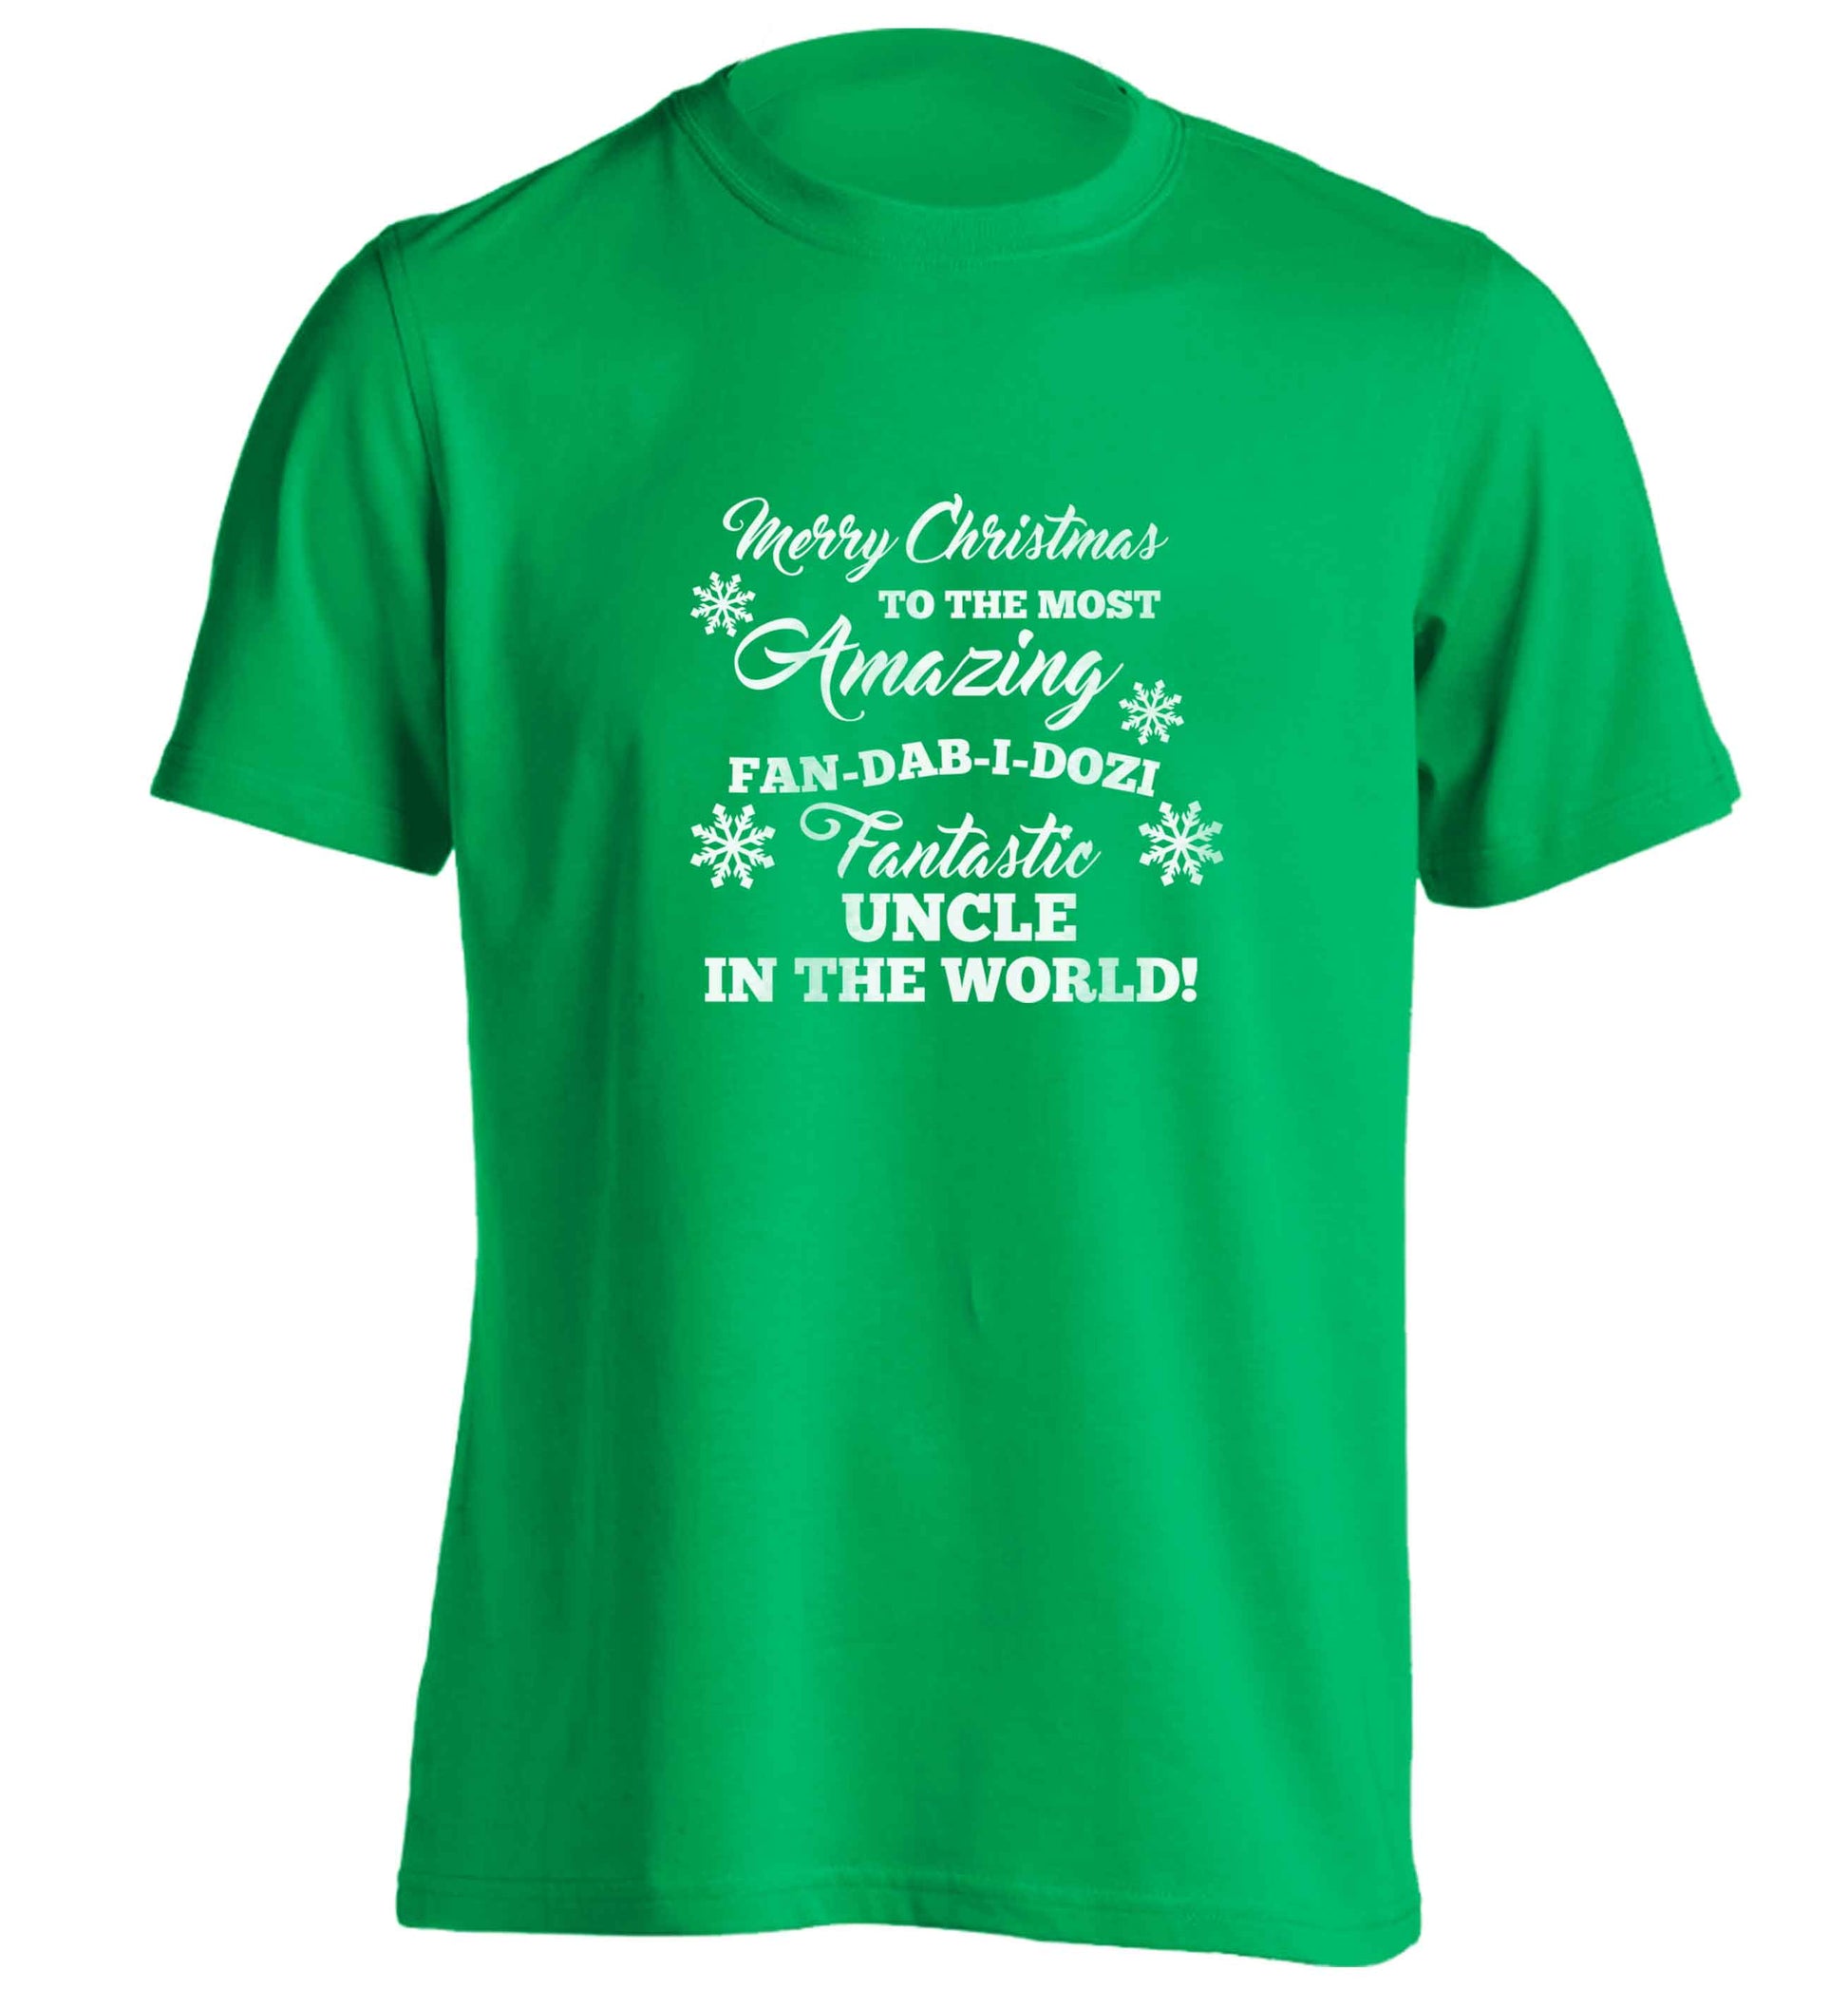 Merry Christmas to the most amazing fan-dab-i-dozi fantasic Uncle in the world adults unisex green Tshirt 2XL